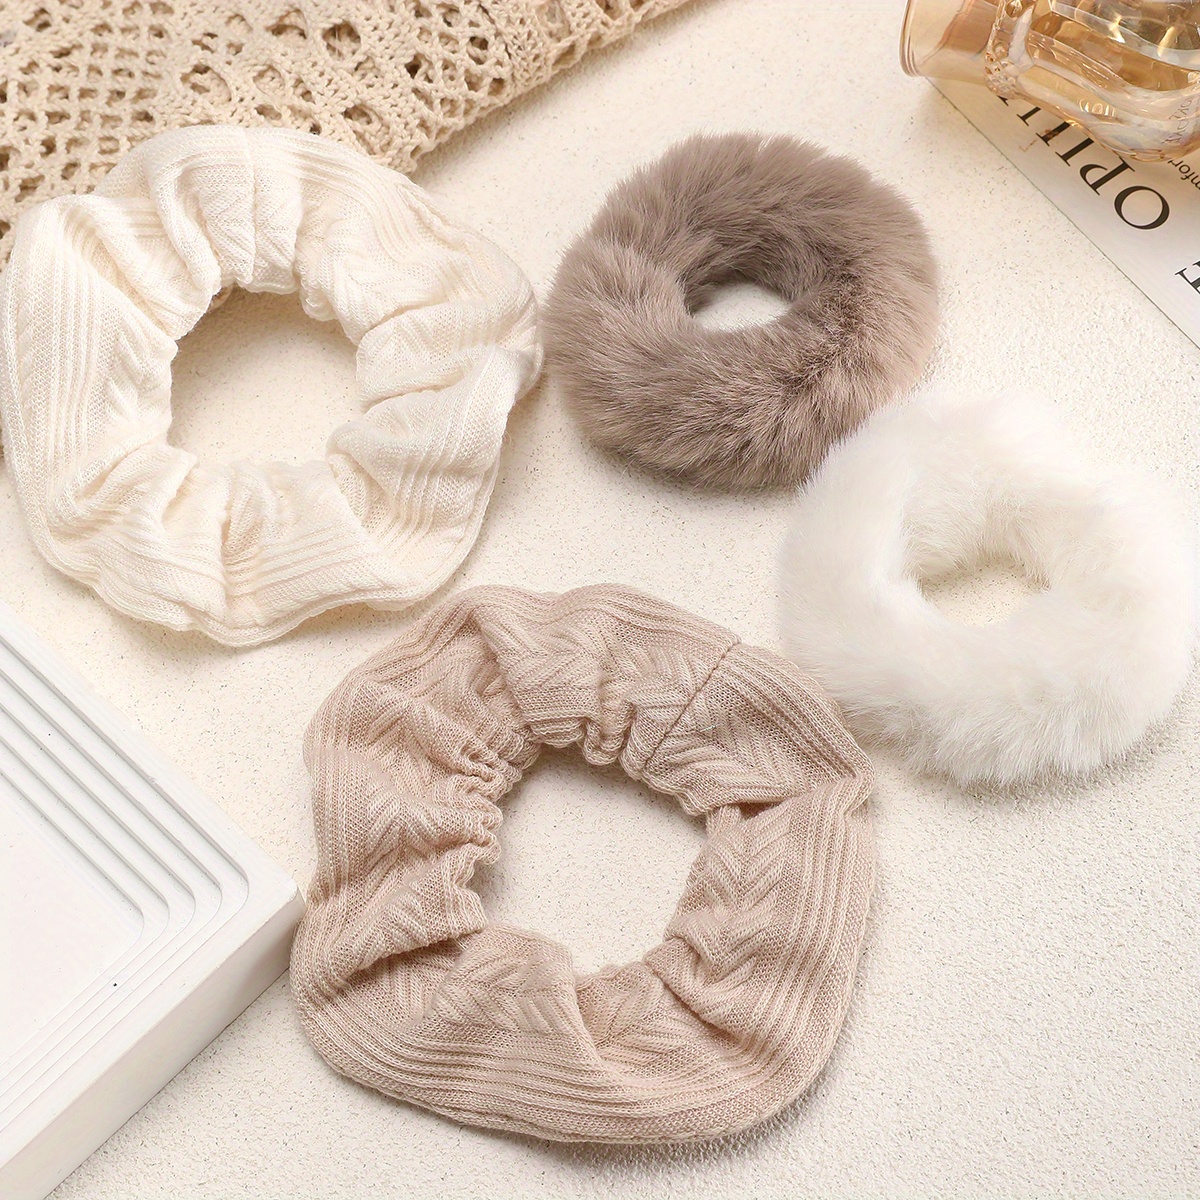 9pcs Women's Hair Accessories Set, Earth-tone Fabric Scrunchies & Basic  Hair Ties, Suitable For Daily Wear